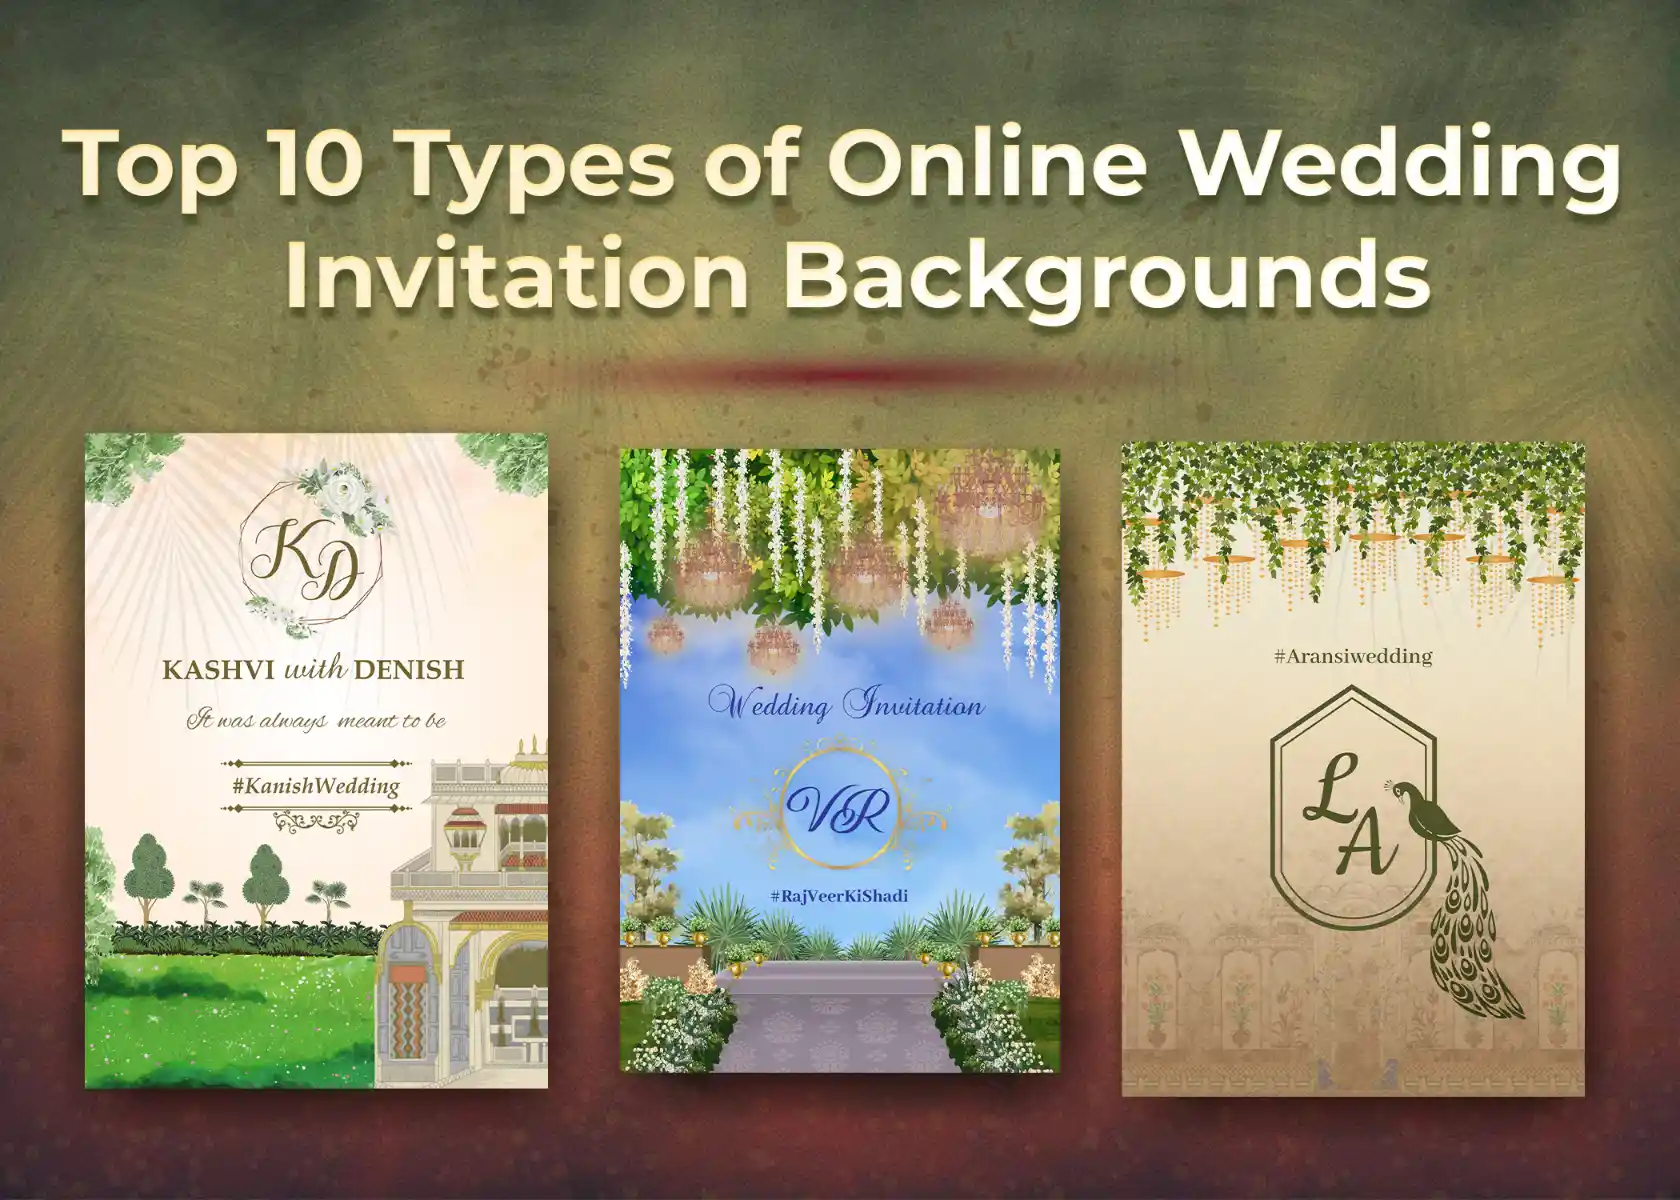 Top 10 Types of Online Wedding Invitation Backgrounds